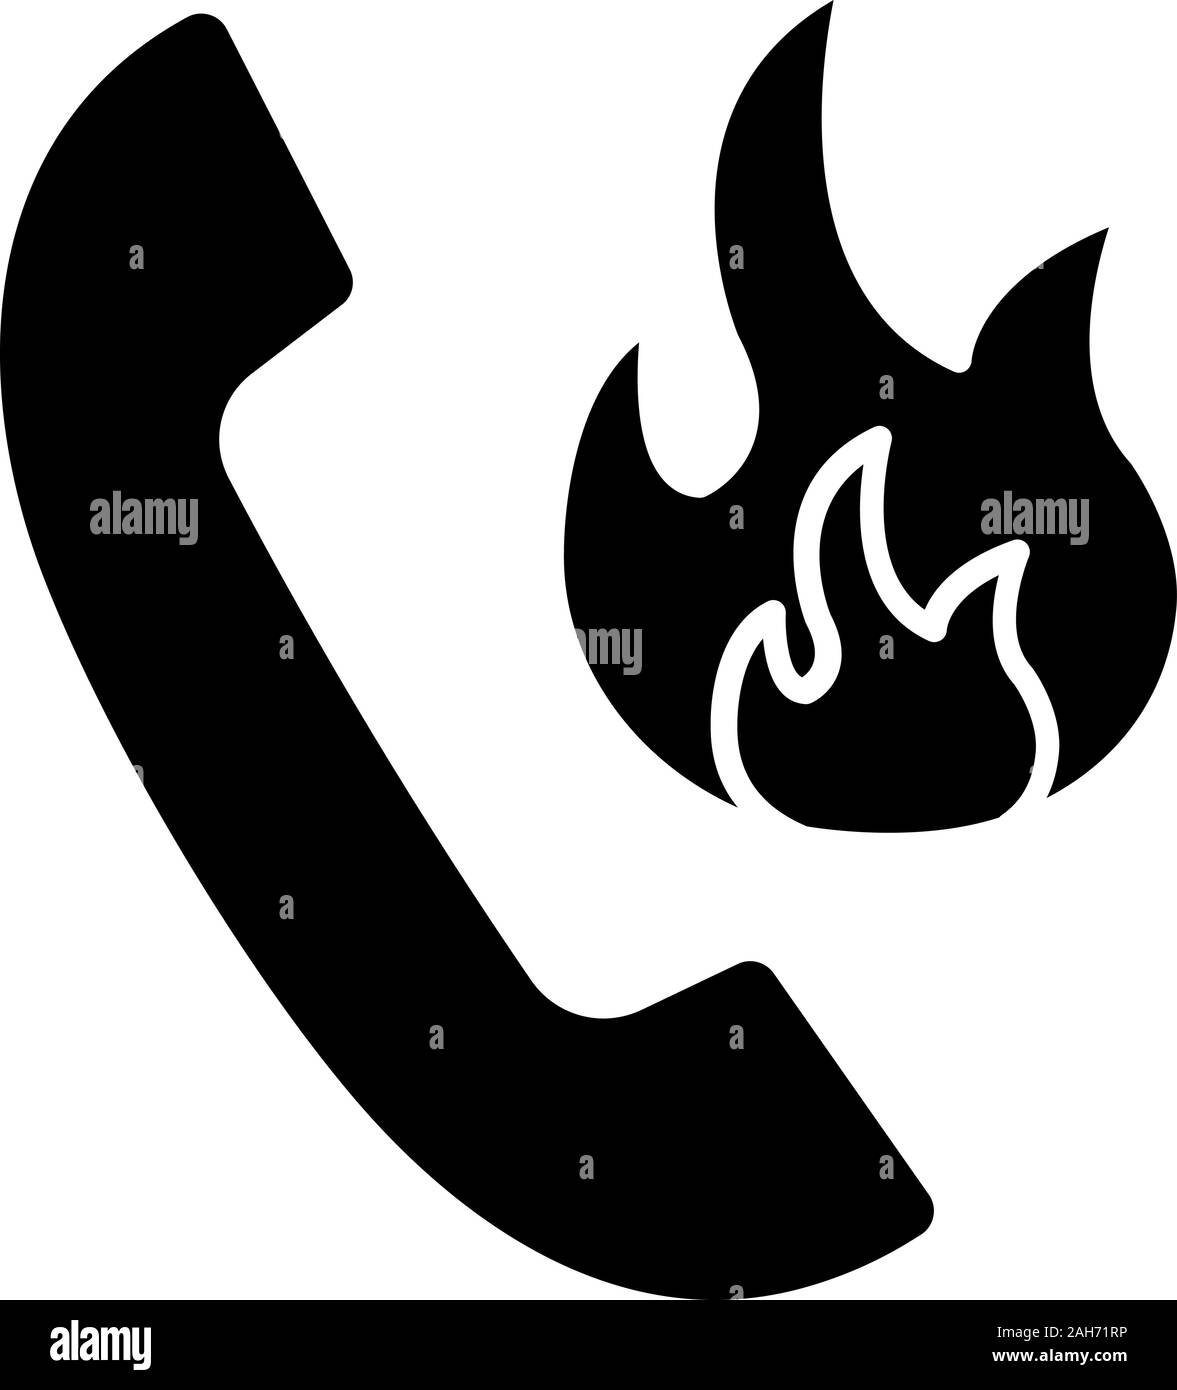 Hotline support glyph icon. Fire emergency call. Handset with fire. Silhouette symbol. Negative space. Vector isolated illustration Stock Vector